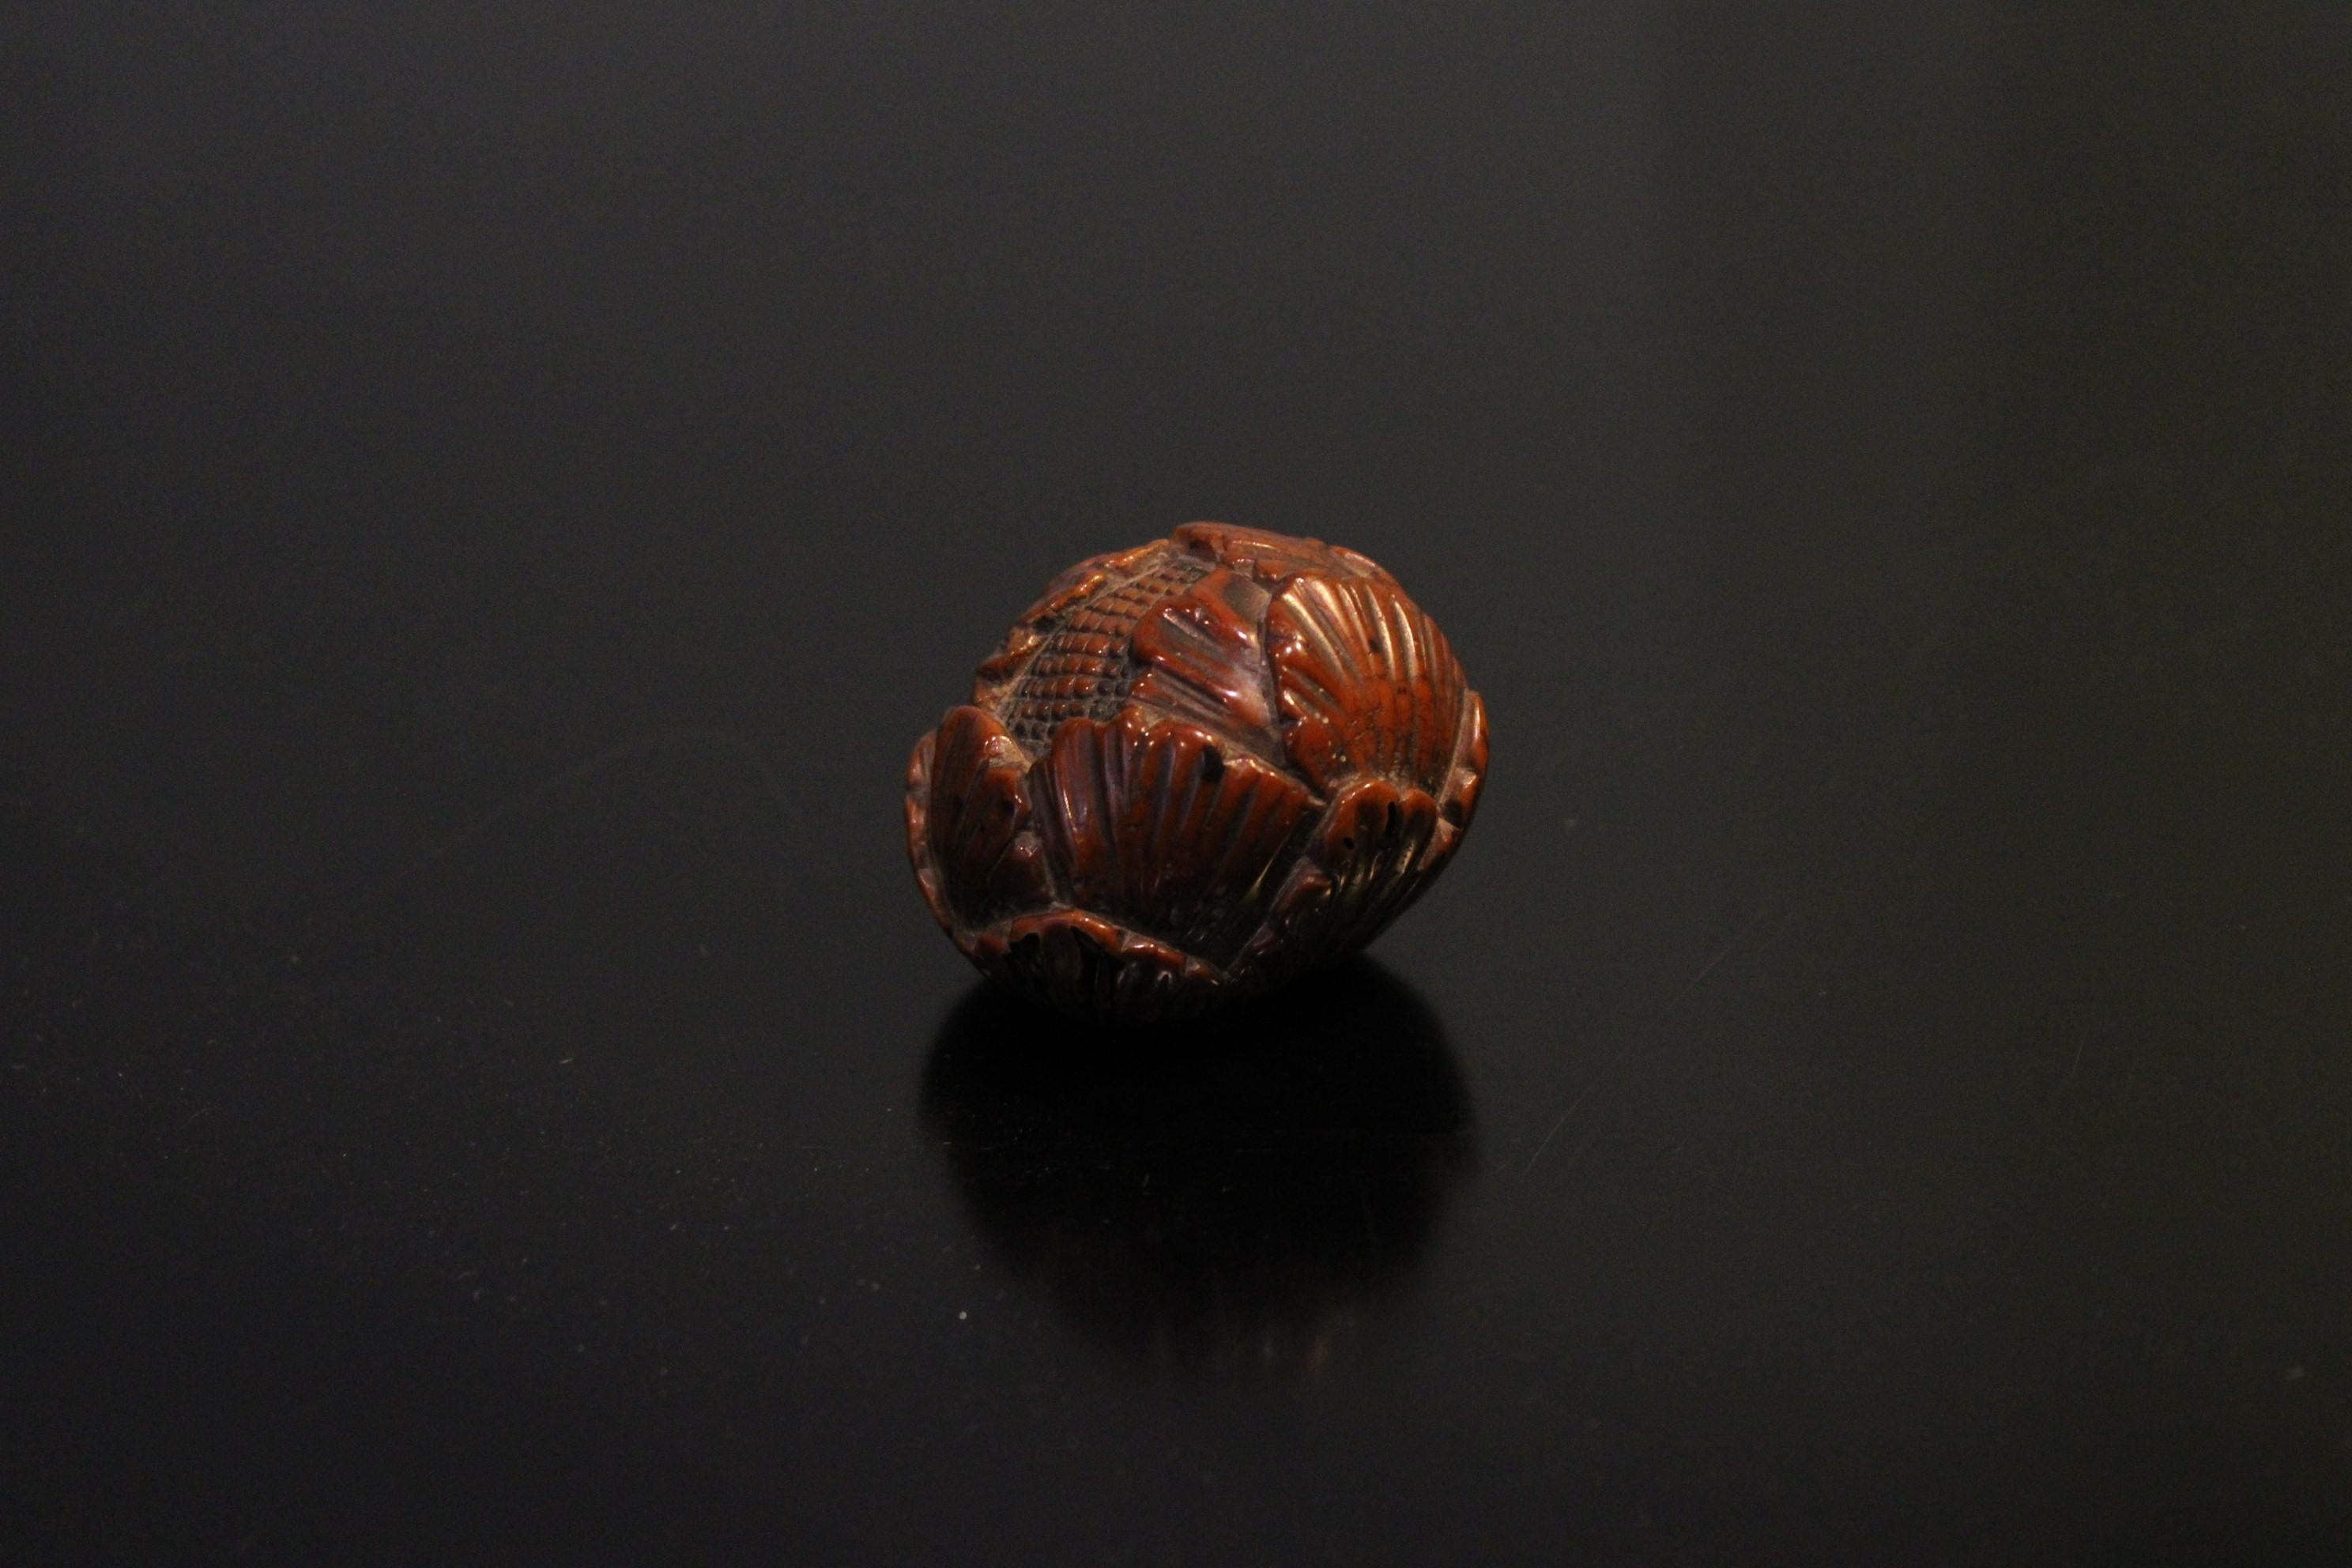 Netsuke, Japan early 20th century. Signed.
Bud. 
Carved, incised and patinated boxwood.
Measures: H. 3.5 cm. L. 4.5 cm.